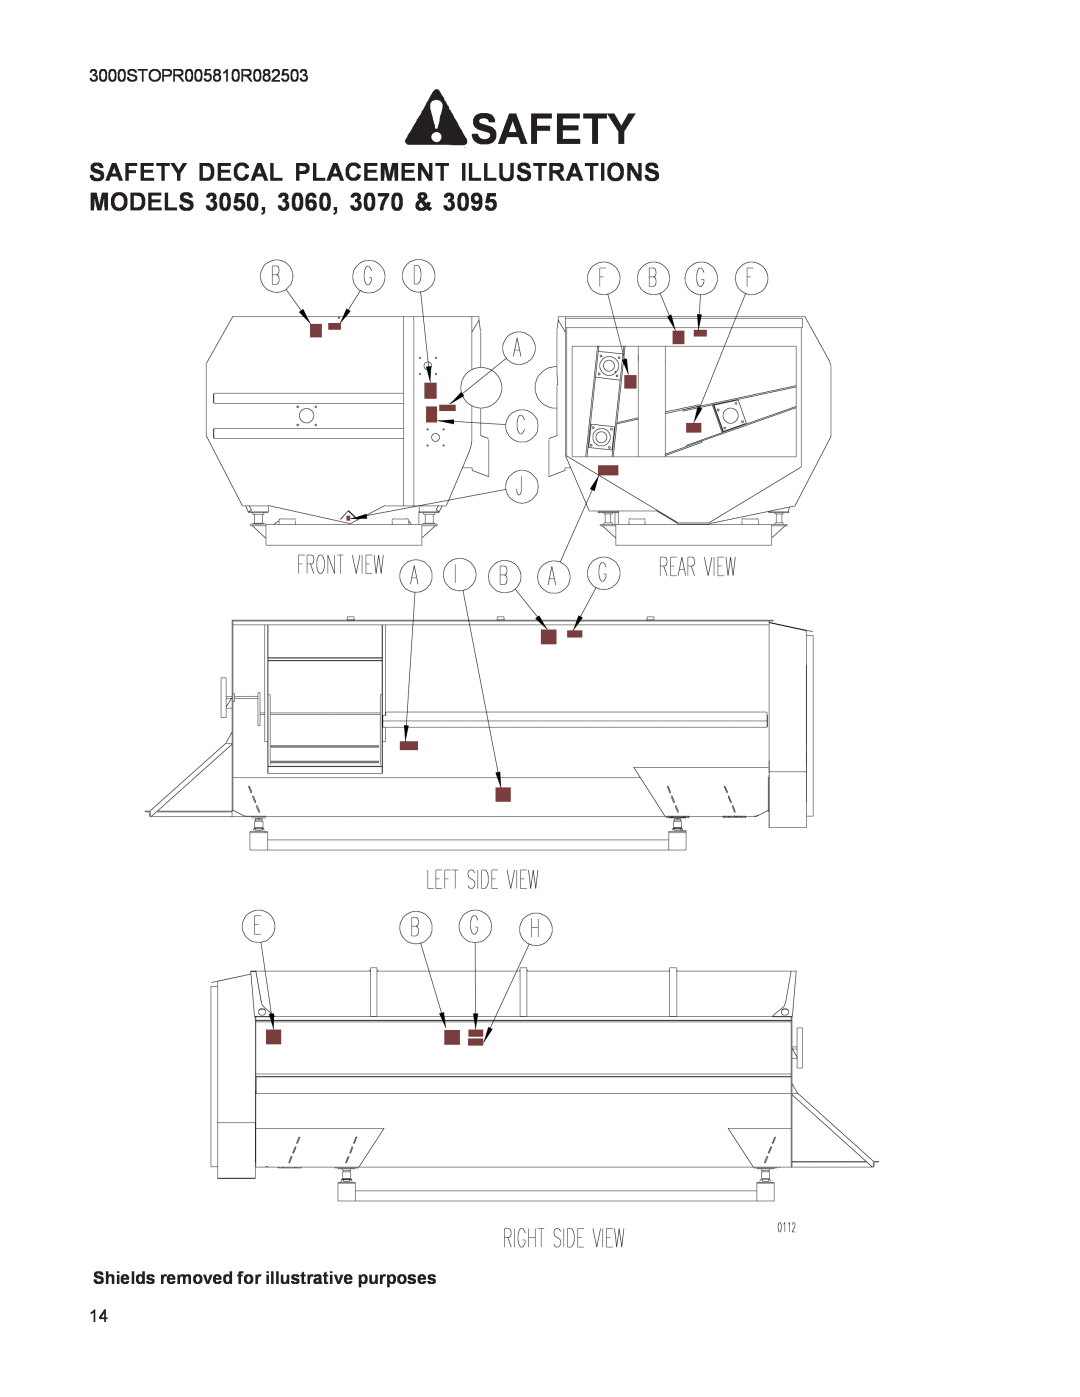 Kuhn Rikon 3095, 3036, 3025, 3015, 3020, 3042, 3030 SAFETY DECAL PLACEMENT ILLUSTRATIONS MODELS 3050, 3060, 3070, Safety 